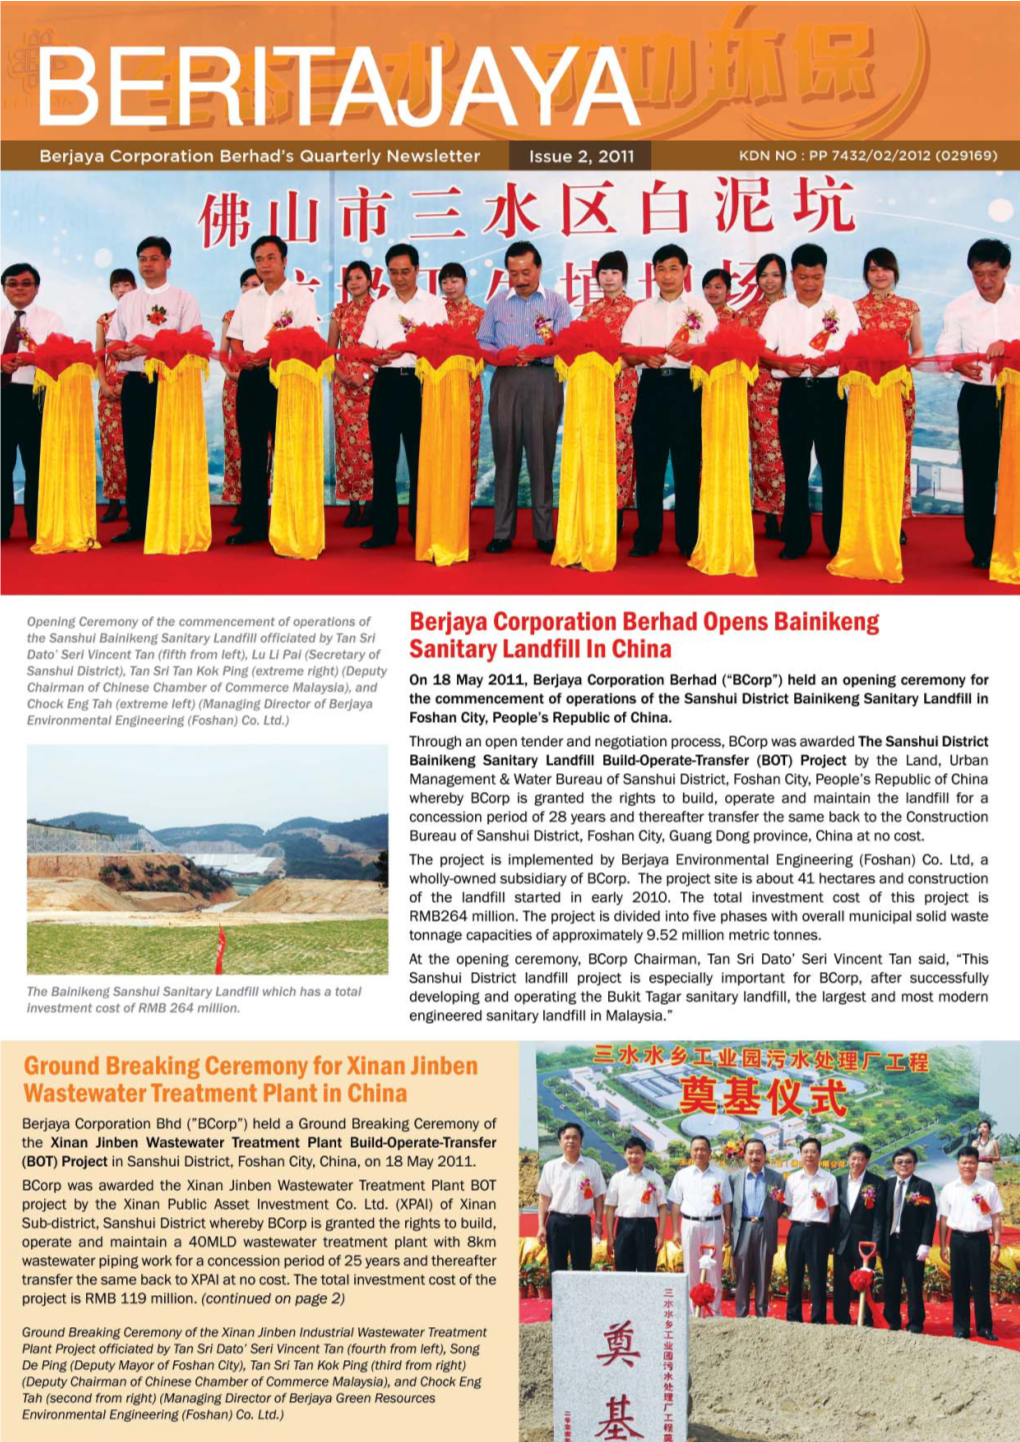 Beritajaya Issue 2, 2011 | 1 CORPORATE NEWS CHAIRMAN’S MESSAGE the Second Quarter of 2011 Was Indeed Eventful for the Group